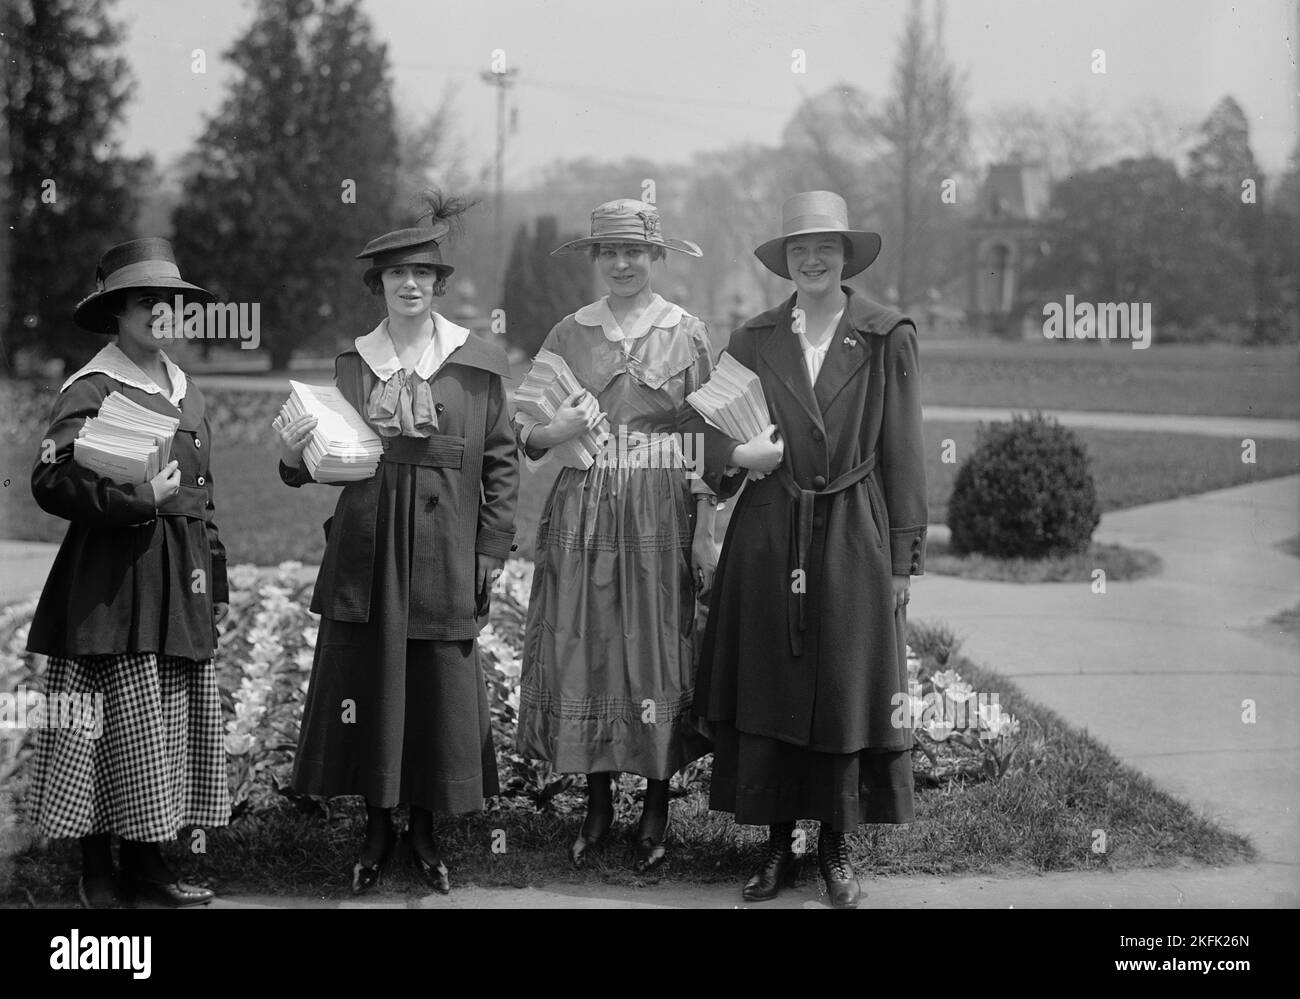 National Emergency War Gardens Com. - Girl Scouts Gardening at D.A.R., 1917. Stock Photo